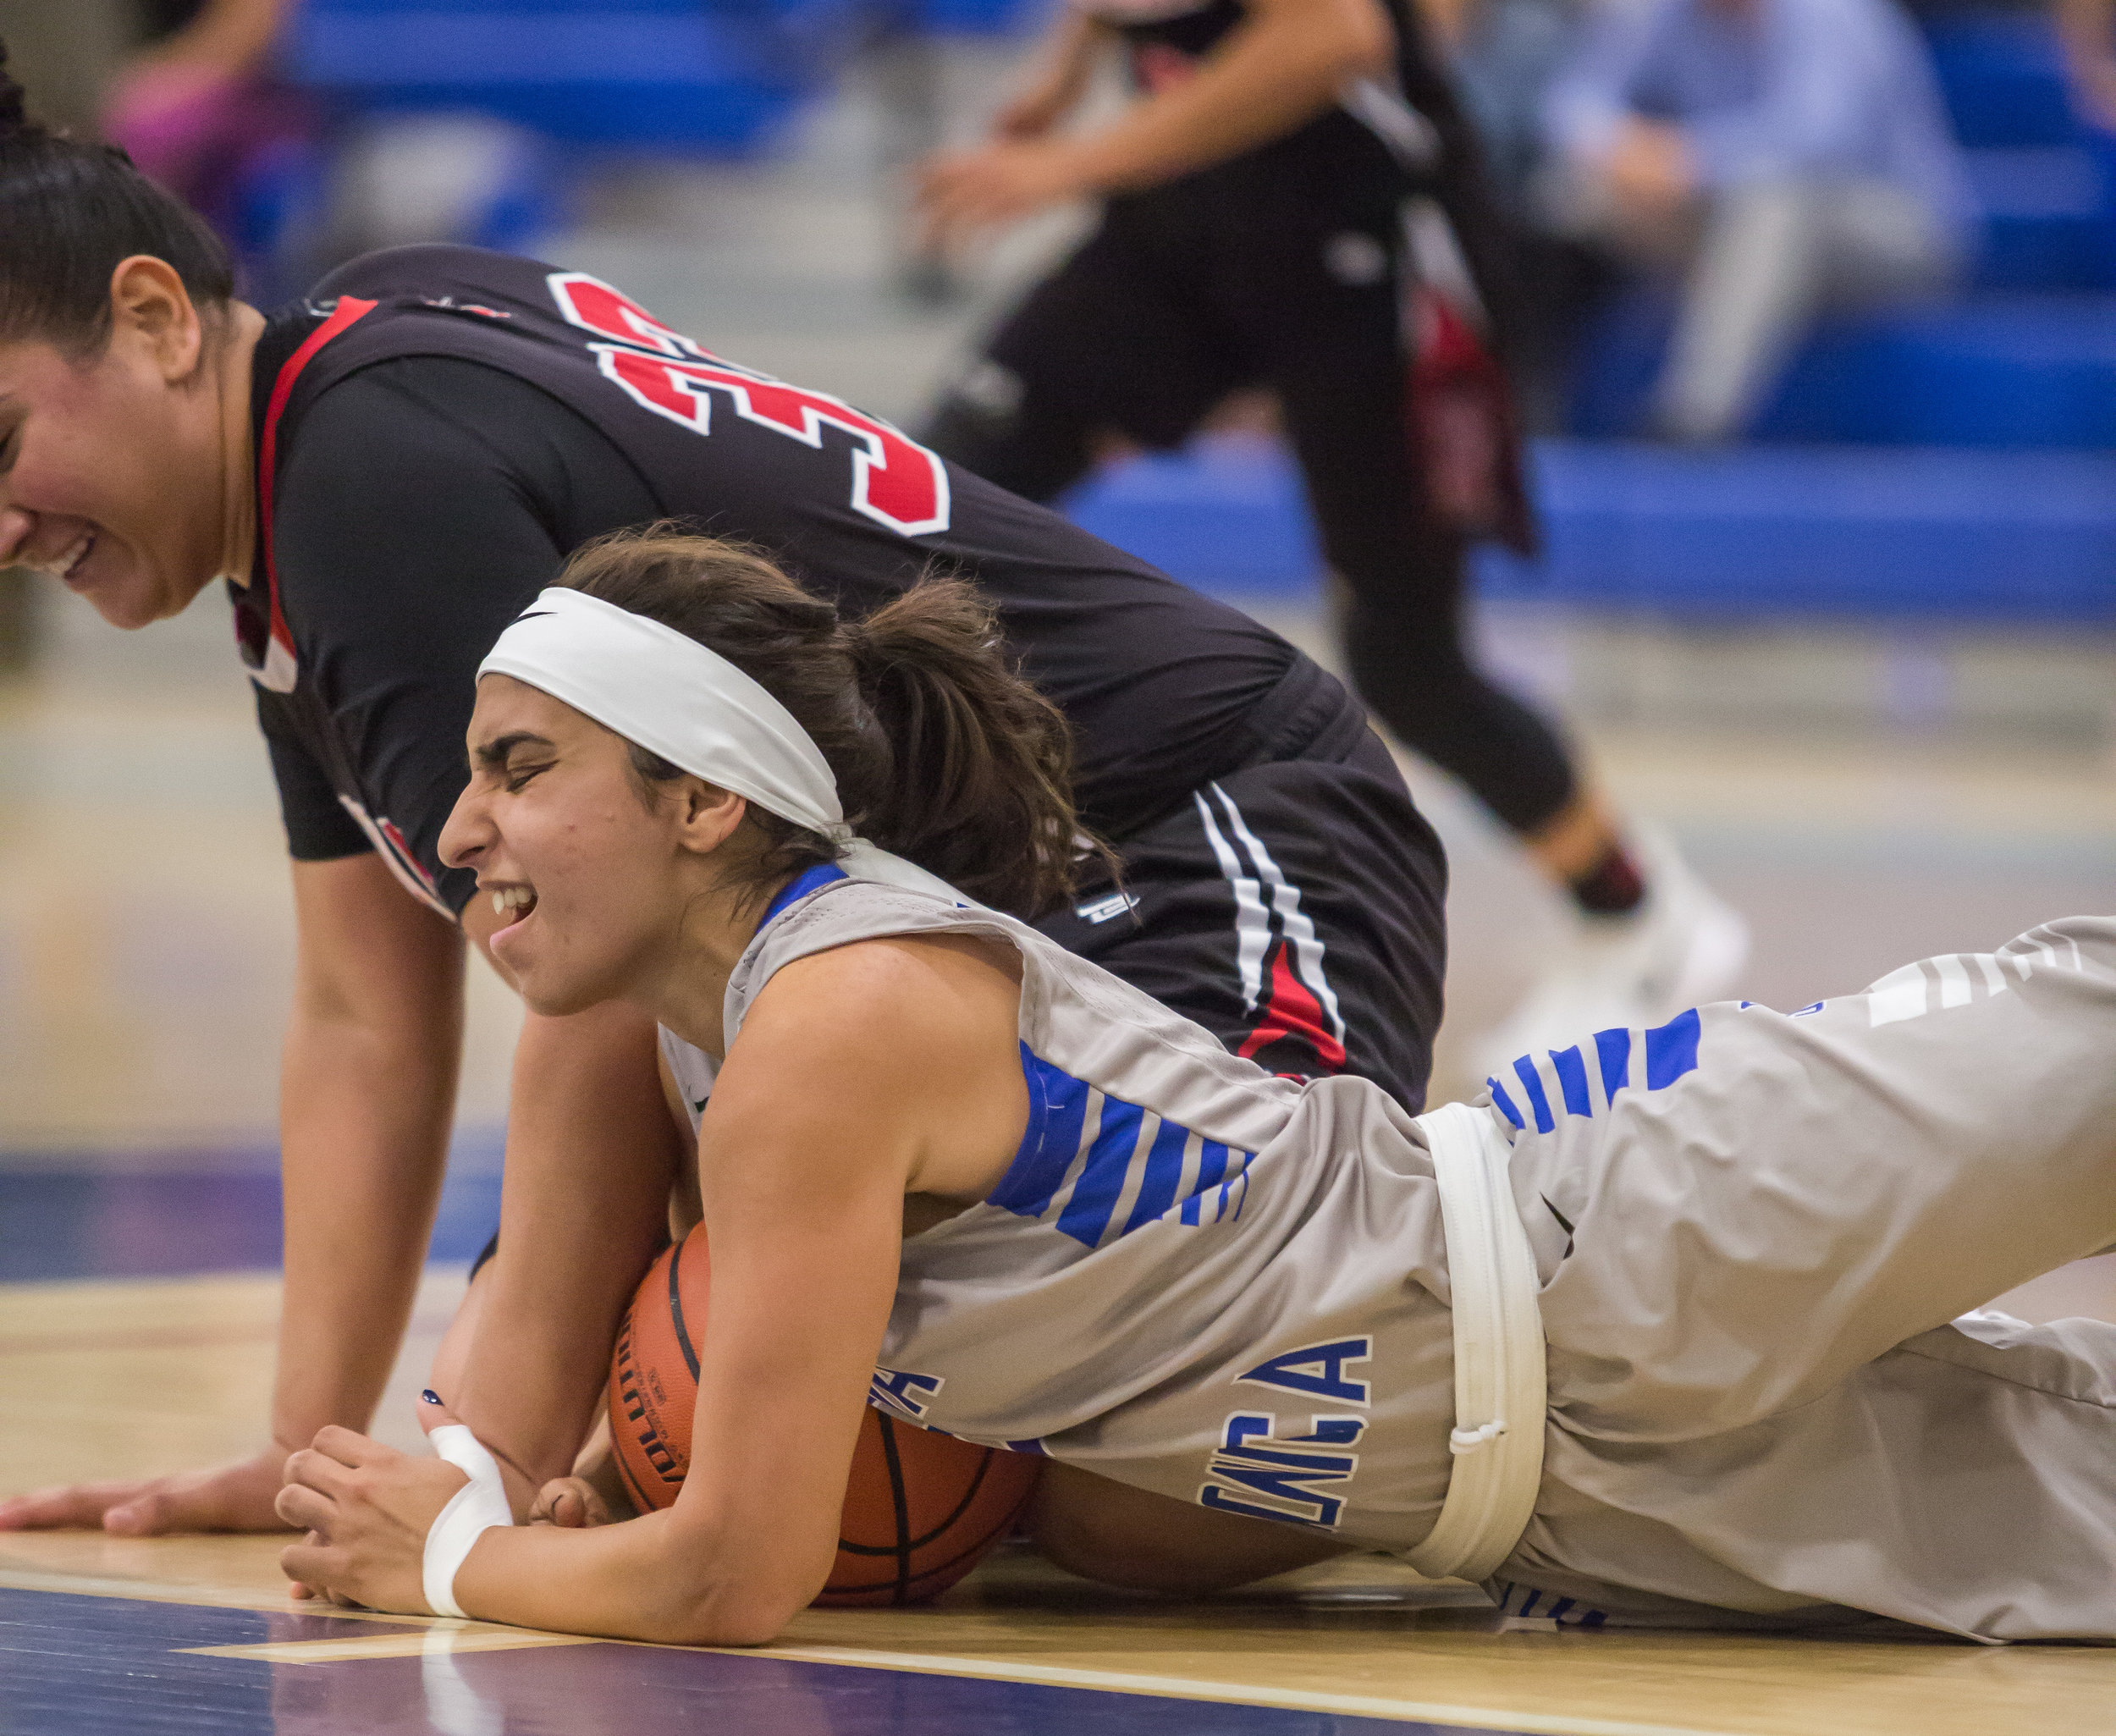  Guard Jessica Melamad (2) of Santa Monica College Corsairs fights for possession of a loose ball against Forward Alexis Casillas (33) of Santa Ana College. Santa Monica College Corsairs win the game 63-54 against Santa Ana College. On Saturday, Nove